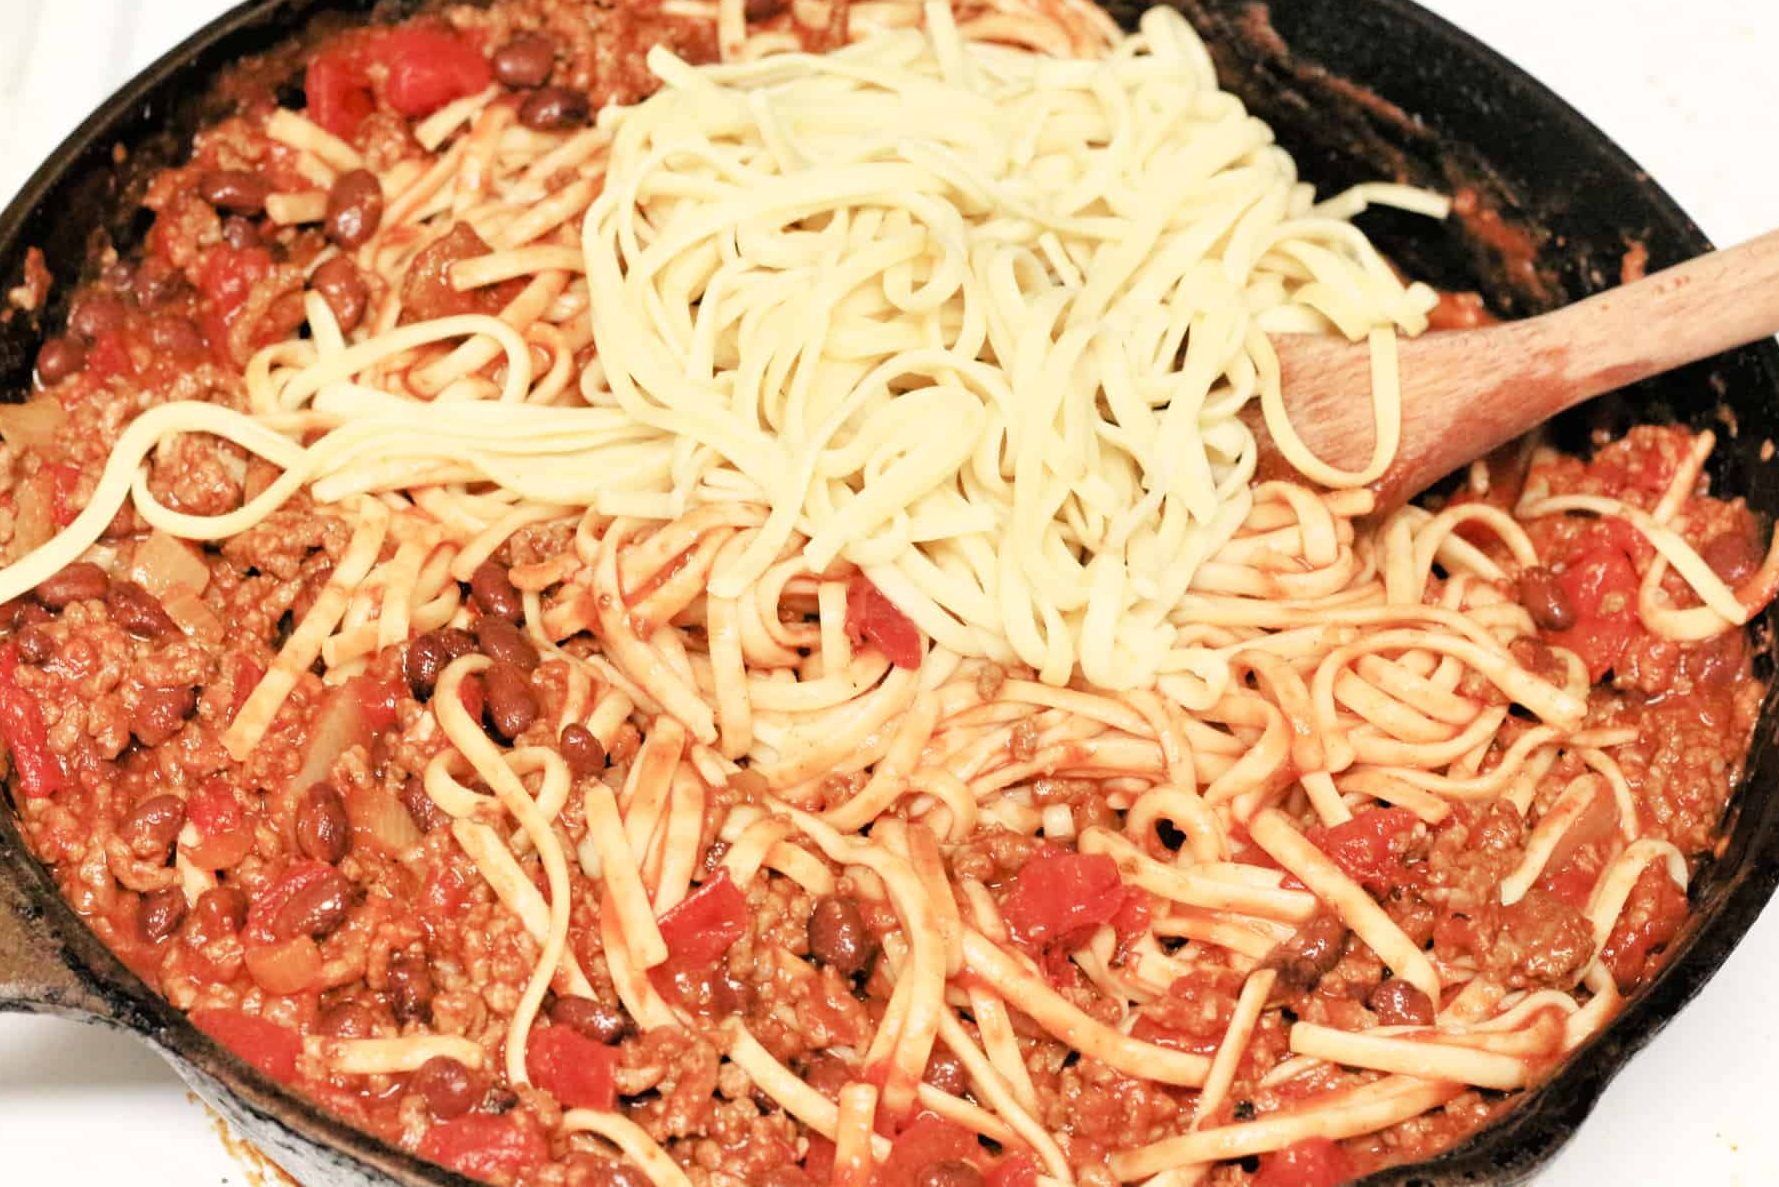 Mix the pasta into the beef mixture